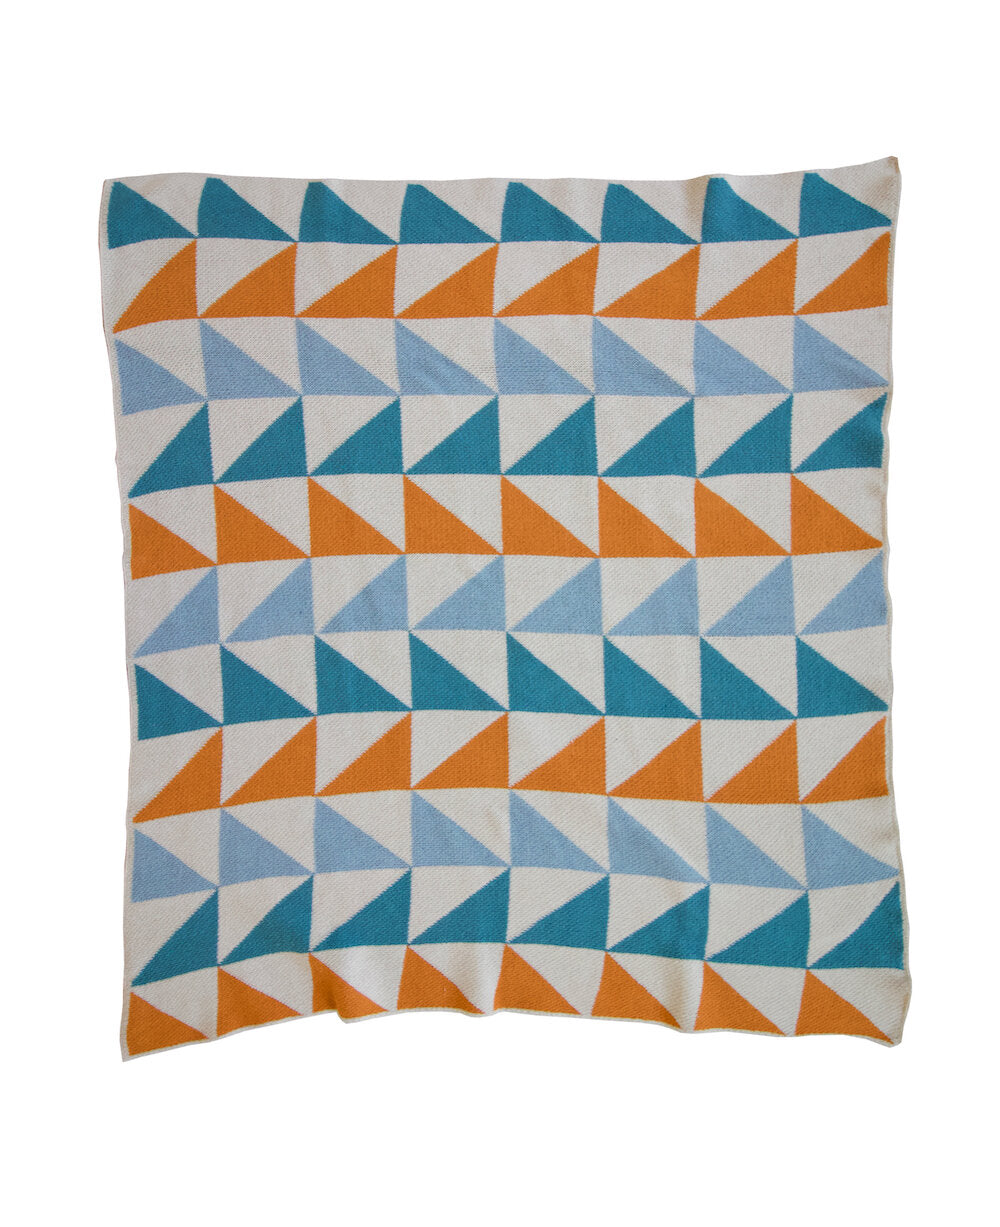 Mini Cotton Throw with Triangle pattern in alternating teal, light blue and terracotta